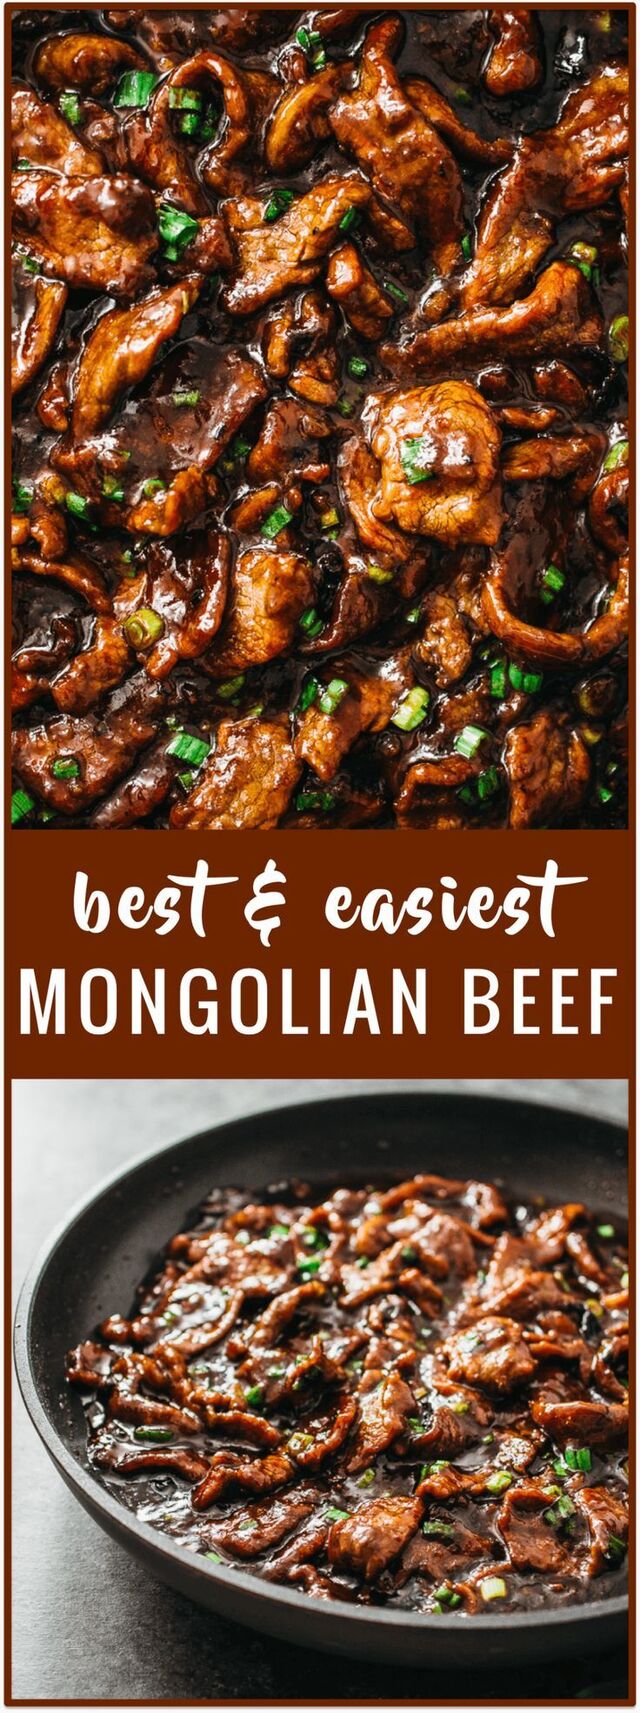 Best Mongolian beef: easy, authentic, and fast 15-minute stir-fry recipe with tender b… | Mongolian beef recipes, Beef recipes easy, Mongolian beef recipe pf changs